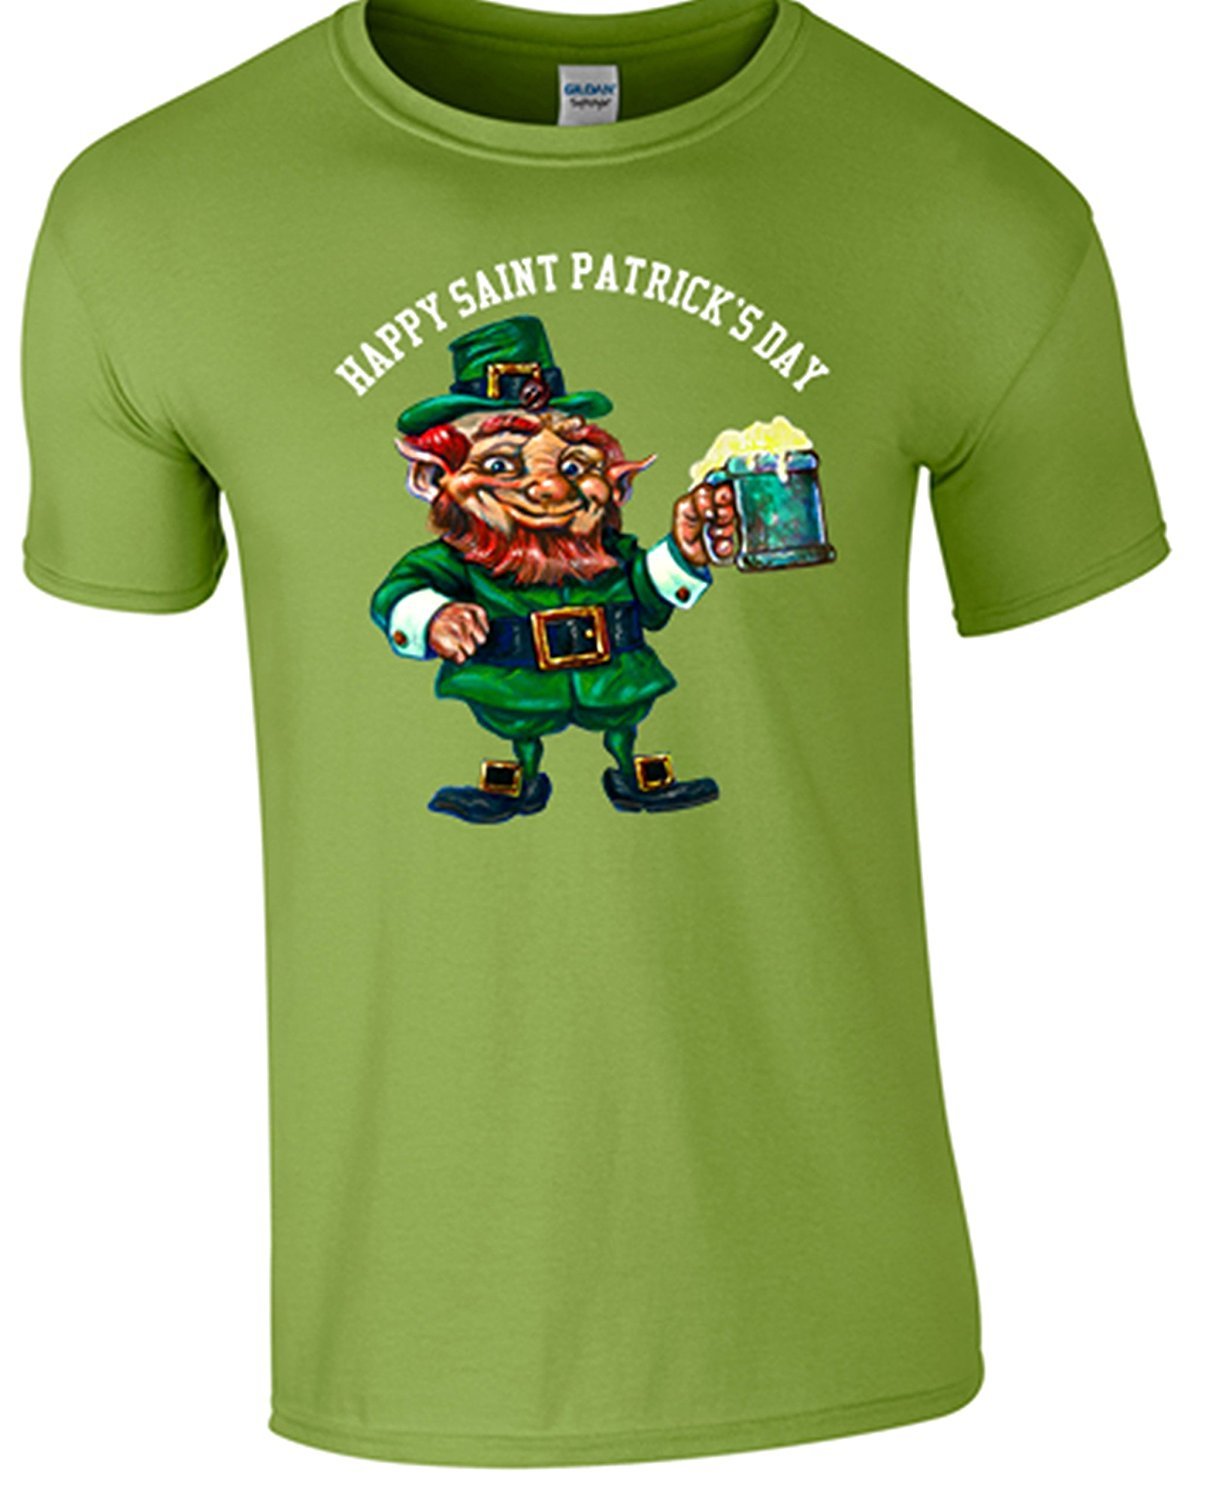 ST Patrick's Day T/Shirt (S, Forest Green) - Army 1157 Kit  Veterans Owned Business